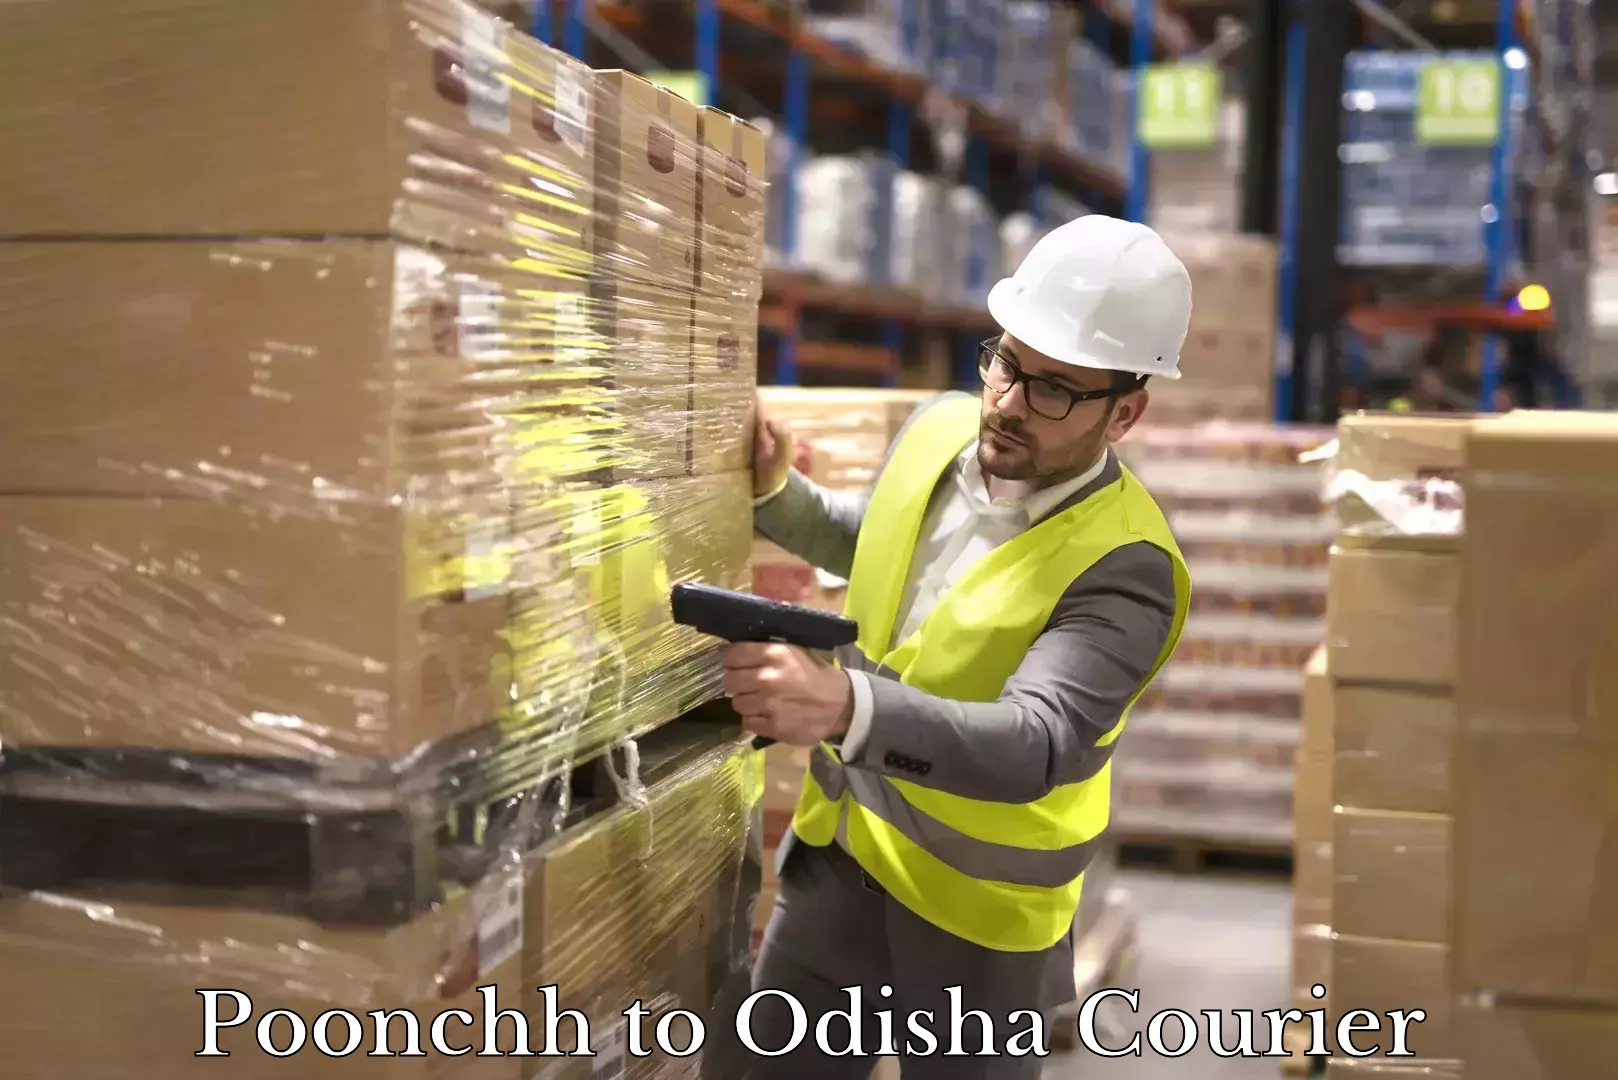 On-call courier service Poonchh to Odisha